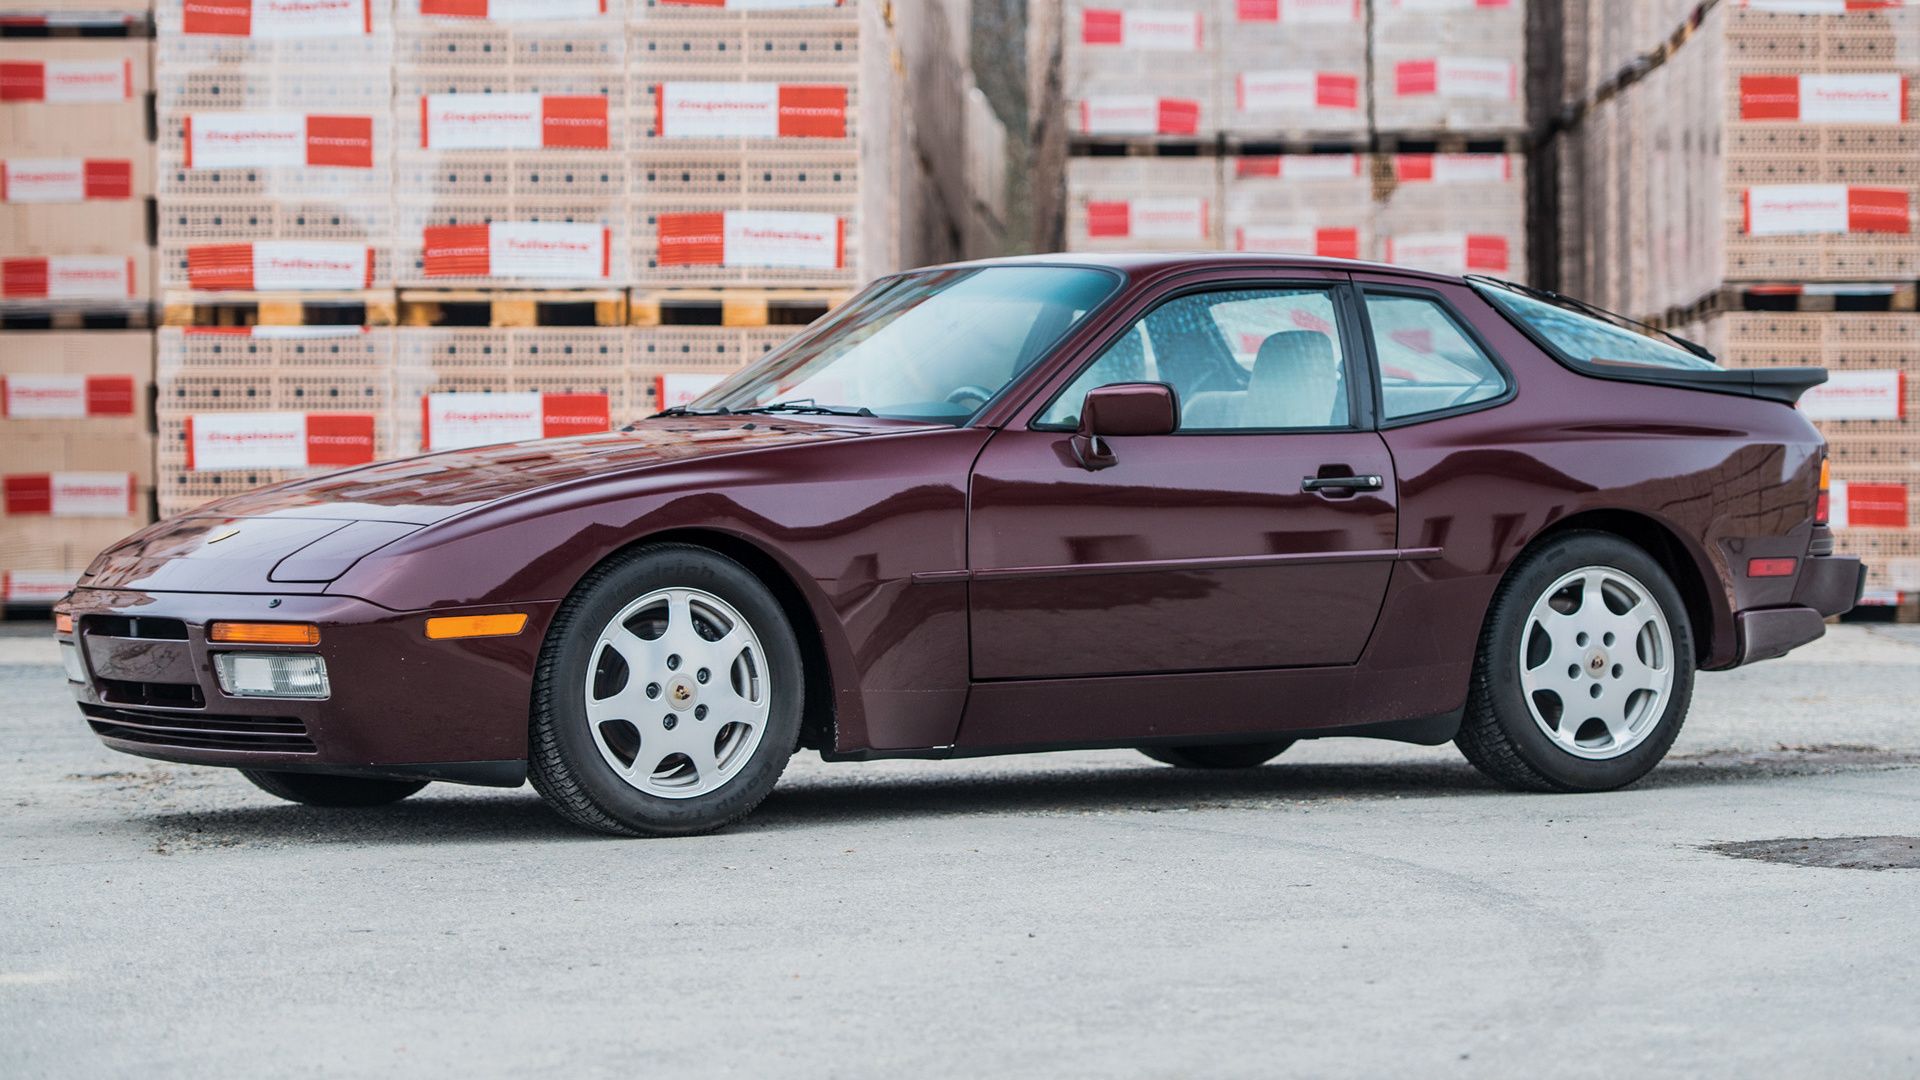 Porsche 944 Turbo S (US) and HD Image